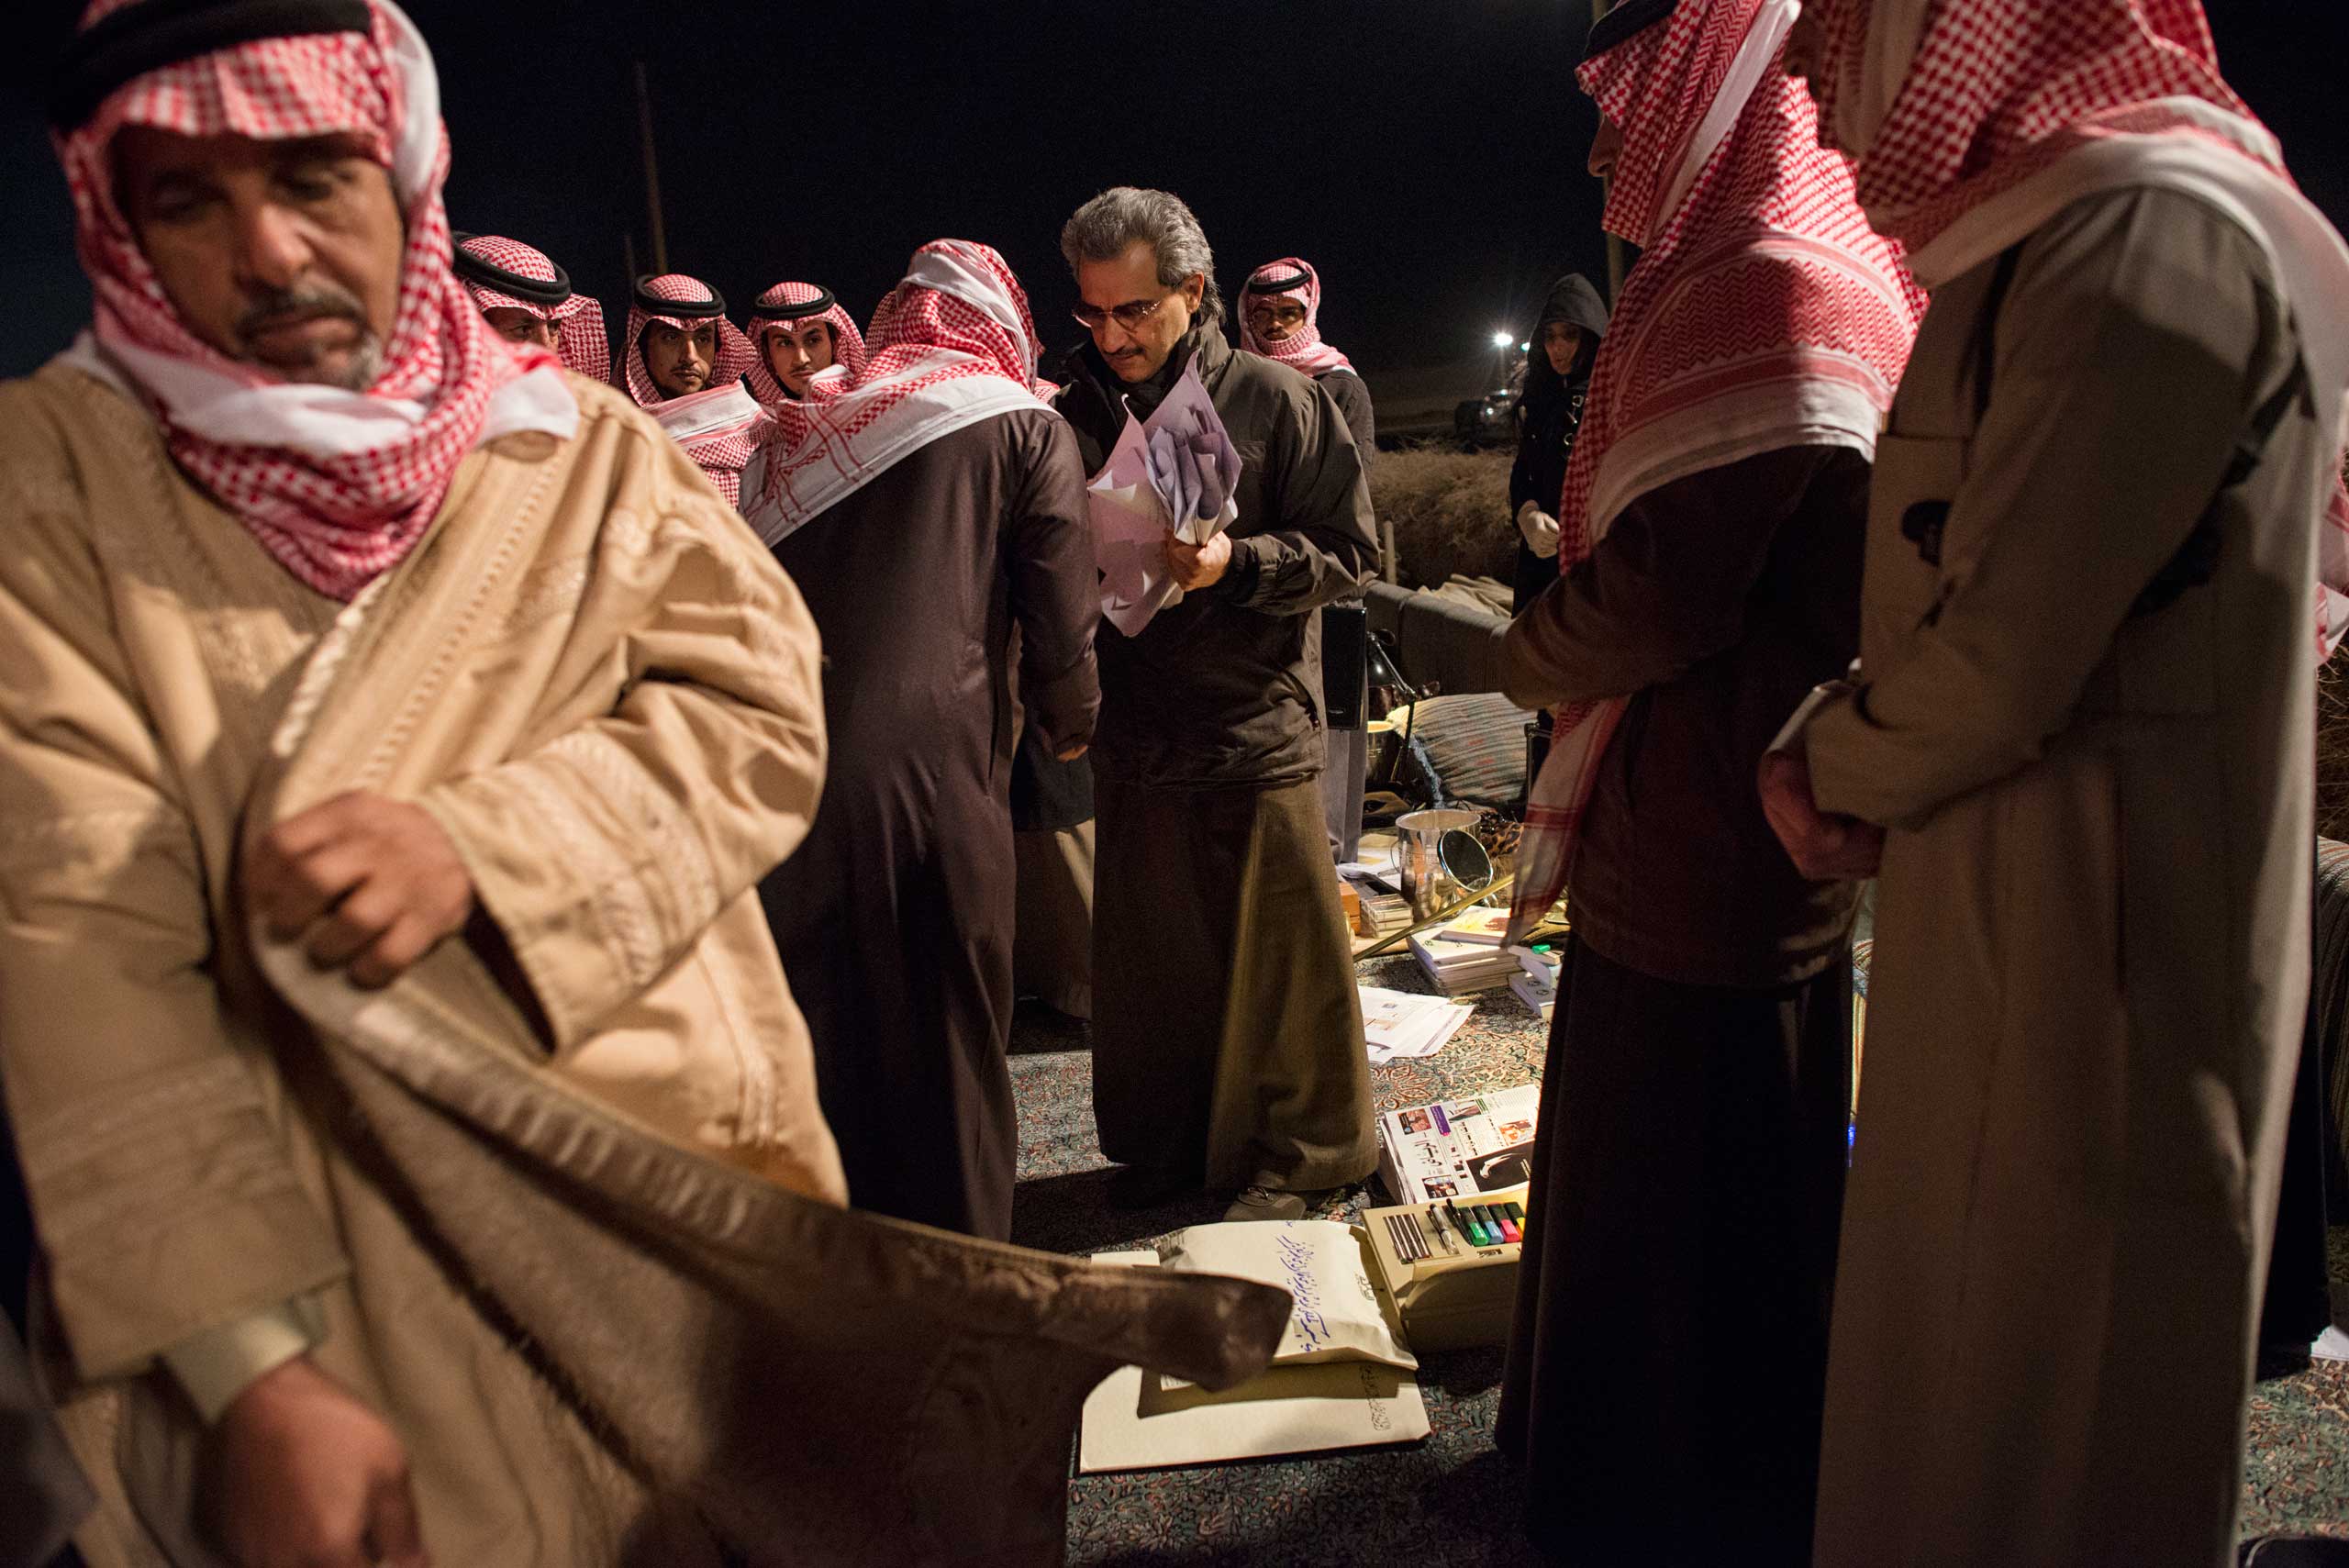 Saudi billionaire, HRH Prince Waleed bin Talal, greets Saudi citizens at a desert camp outside of Riyadh to accept their petitions for his help.